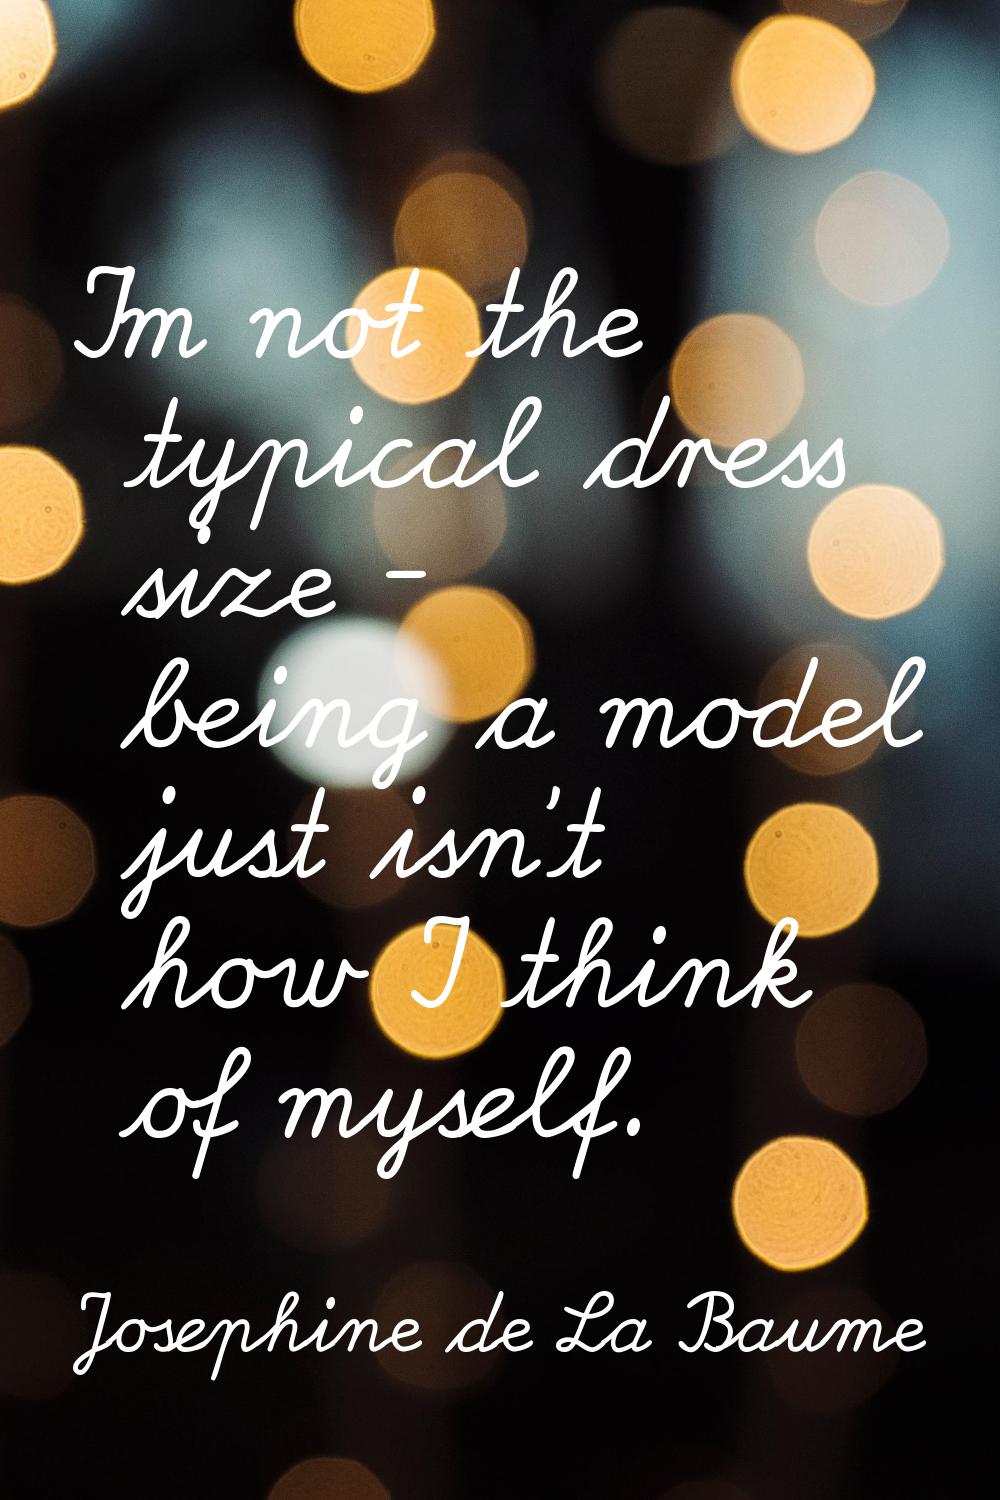 I'm not the typical dress size - being a model just isn't how I think of myself.